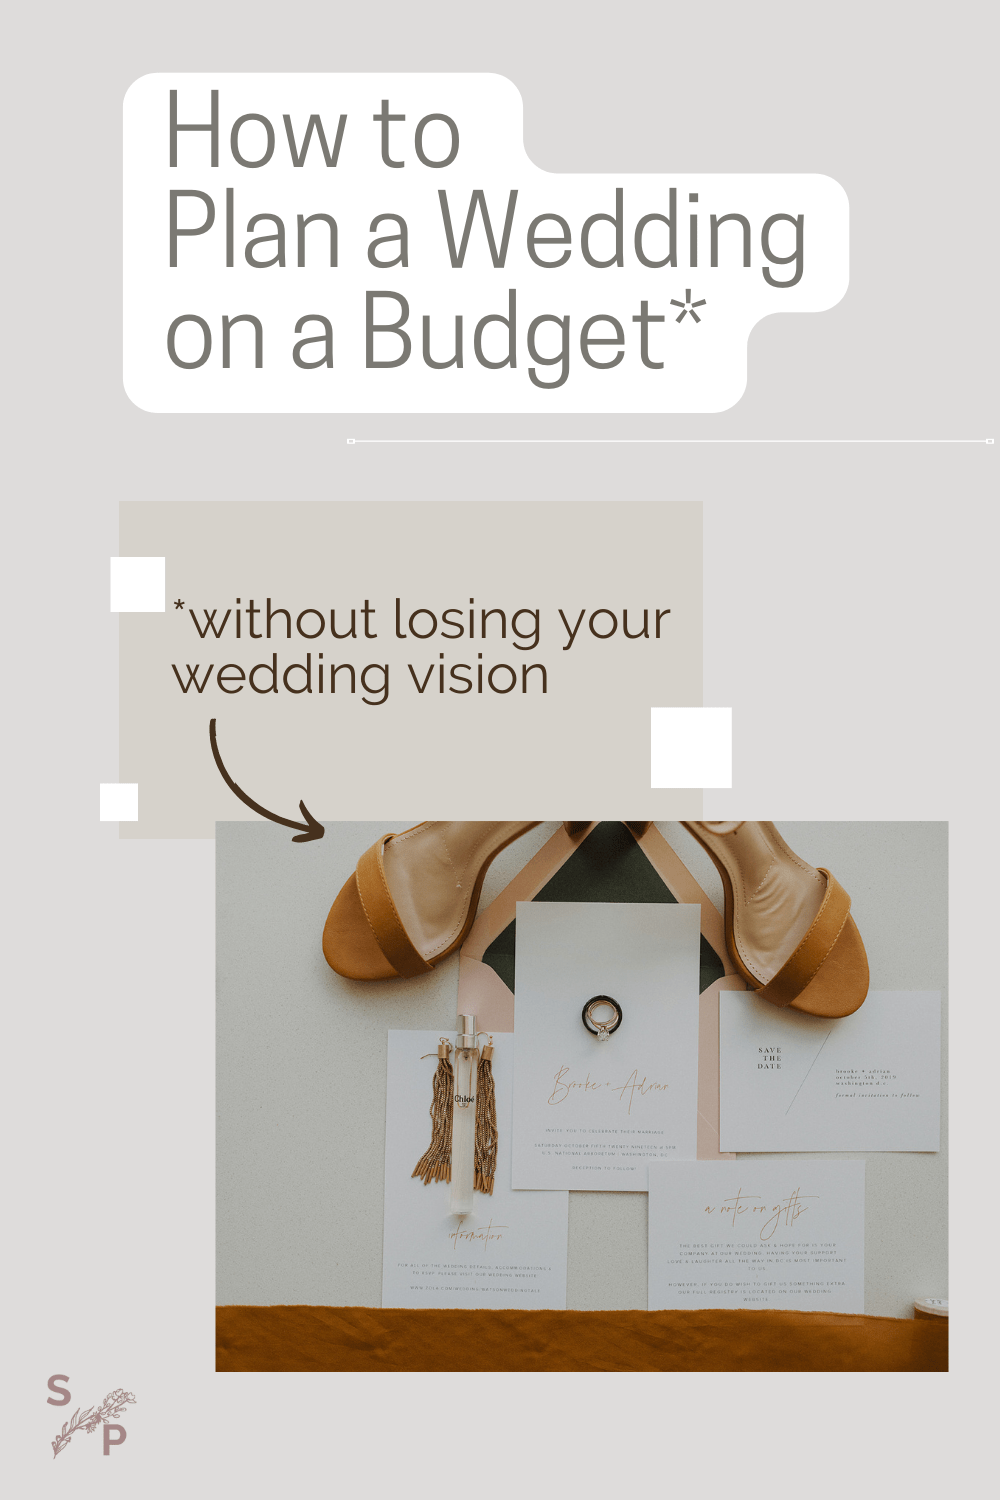 how to plan a wedding on a budget graphic